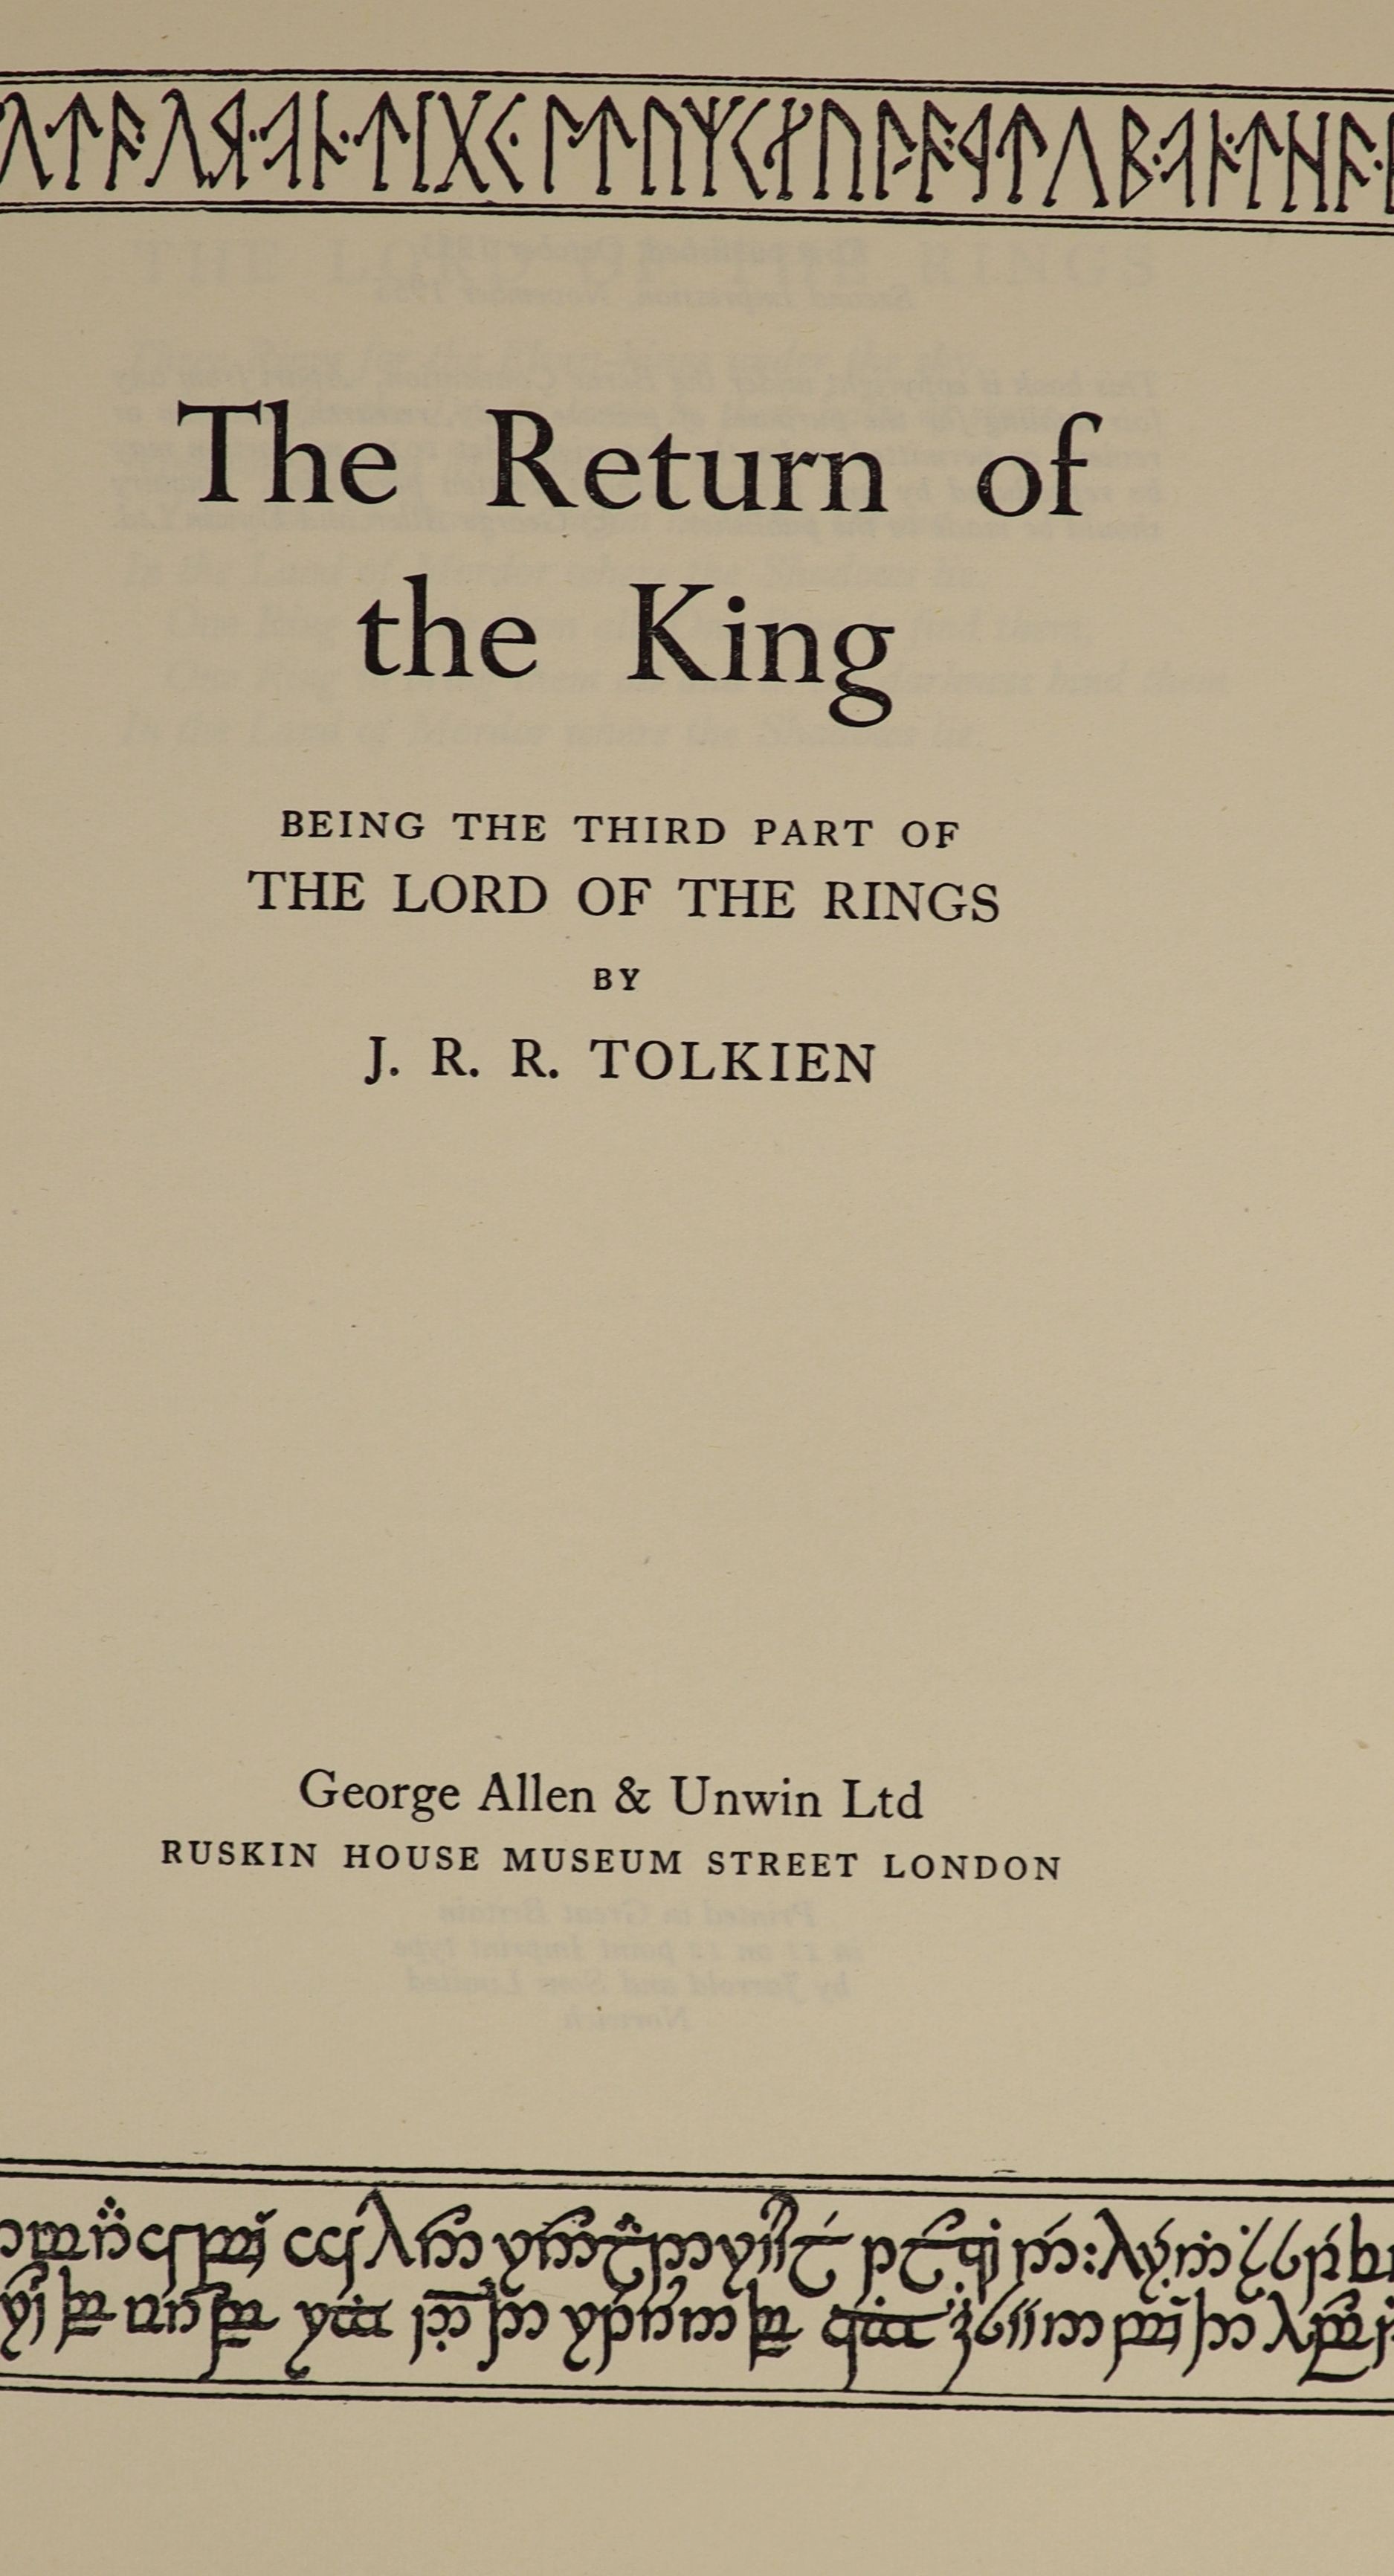 Tolkien, John Ronald Reuel - The Lord of the Rings, 1st editions, 2nd impressions of The Two Towers and The Return of the King, 1955, 4th impression of The Fellowship of the Ring, 1955, all original cloth, all with uncli